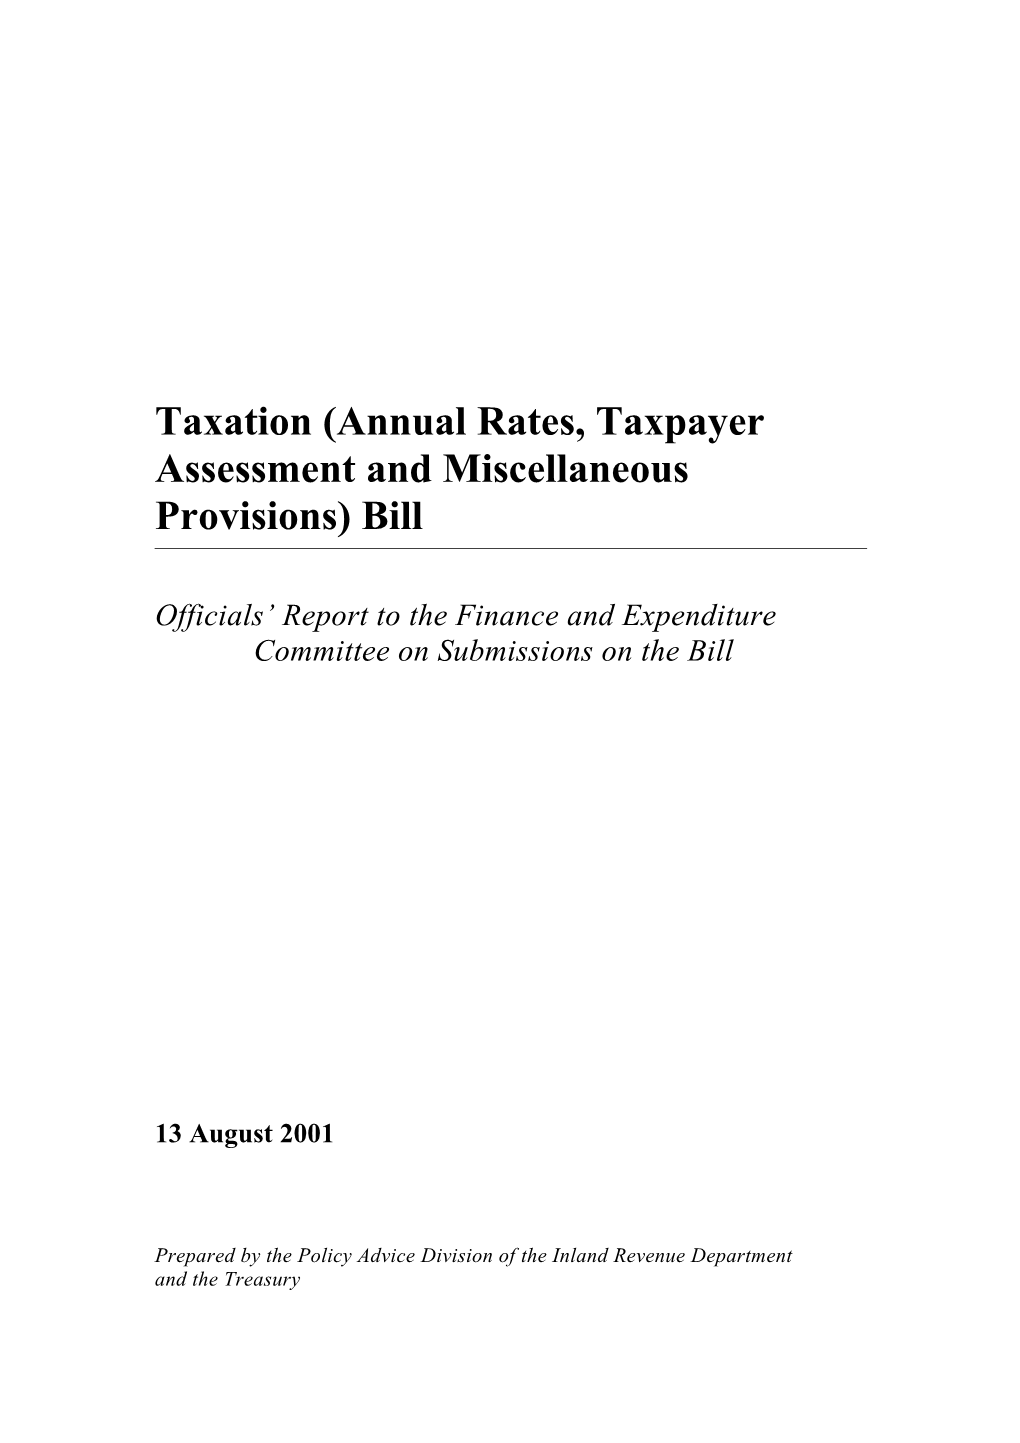 Taxation (Annual Rates, Taxpayer Assessment and Miscellaneous Provisions) Bill